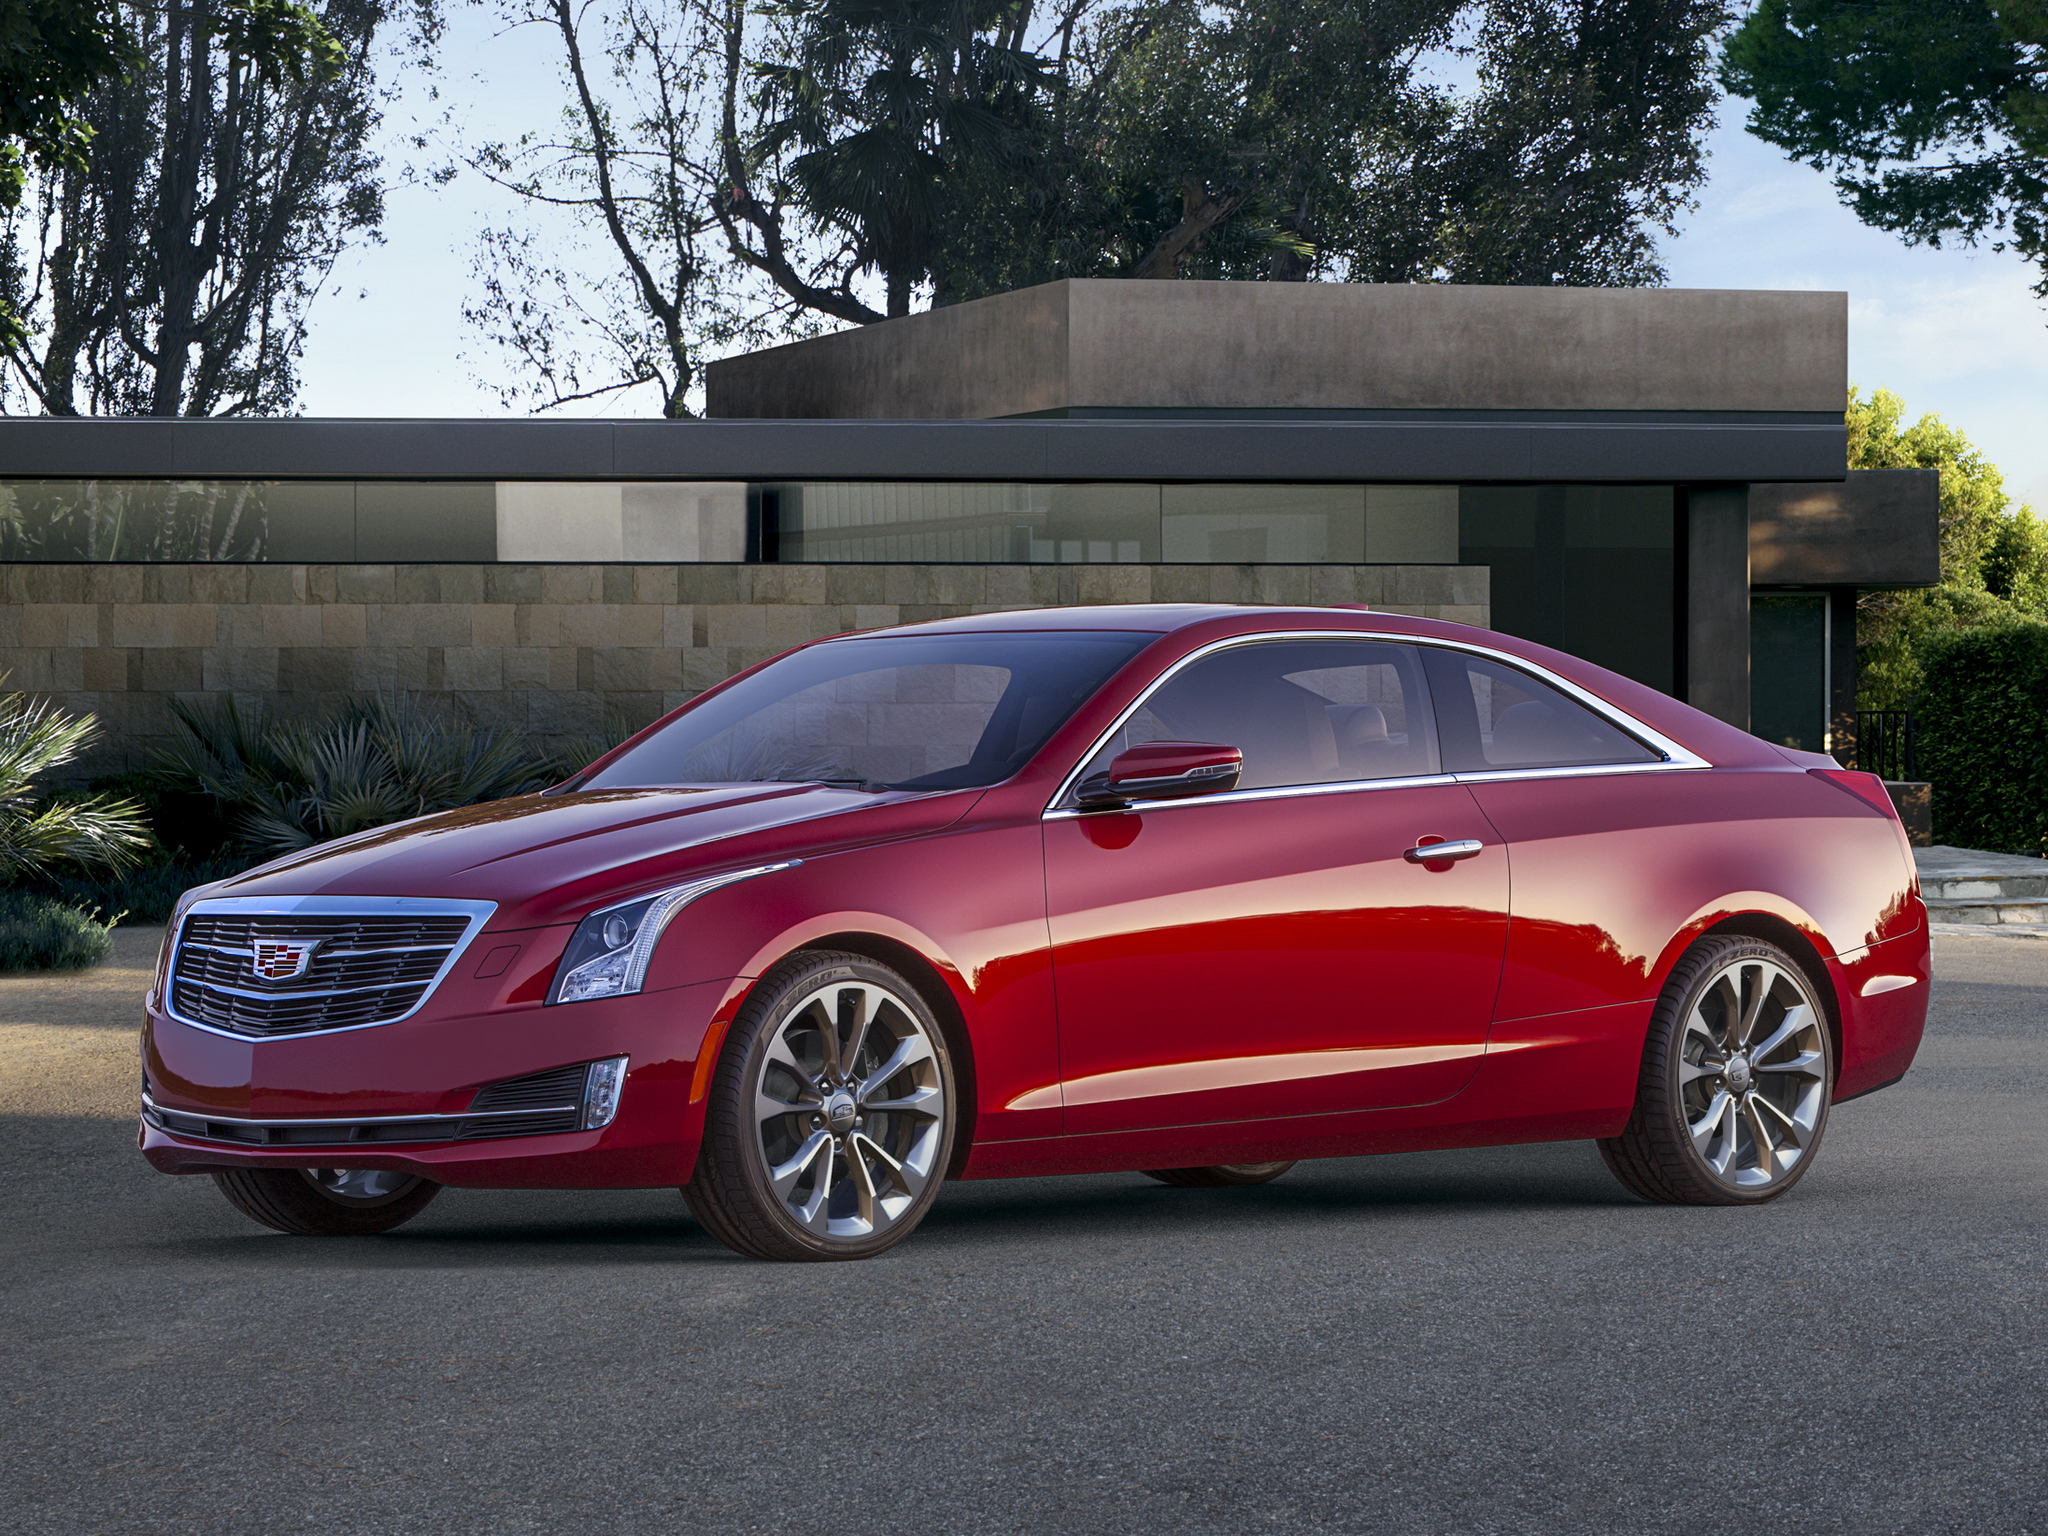 2014, Cadillac, Ats, Coupe, Luxury, Gd Wallpaper